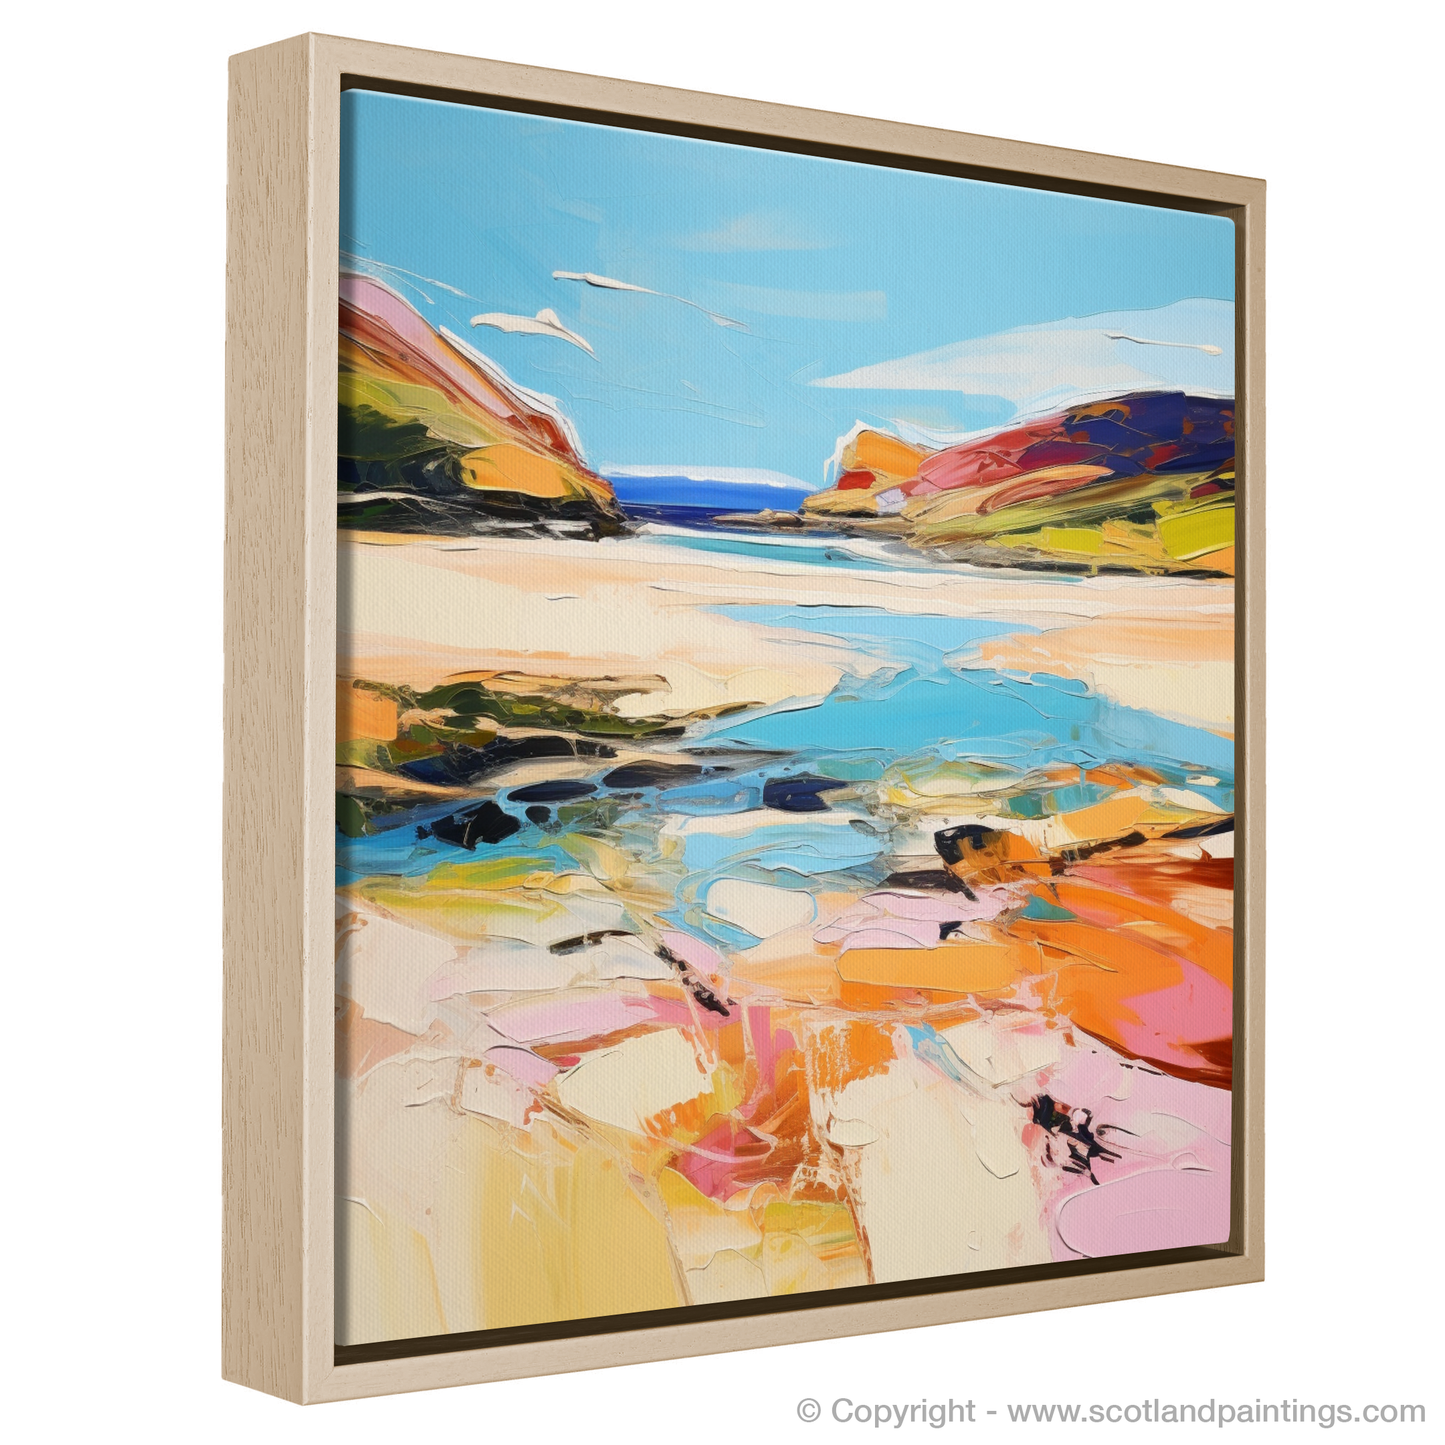 Painting and Art Print of Sandwood Bay, Sutherland in summer entitled "Scottish Summer Abstract: Sandwood Bay Sutherland".